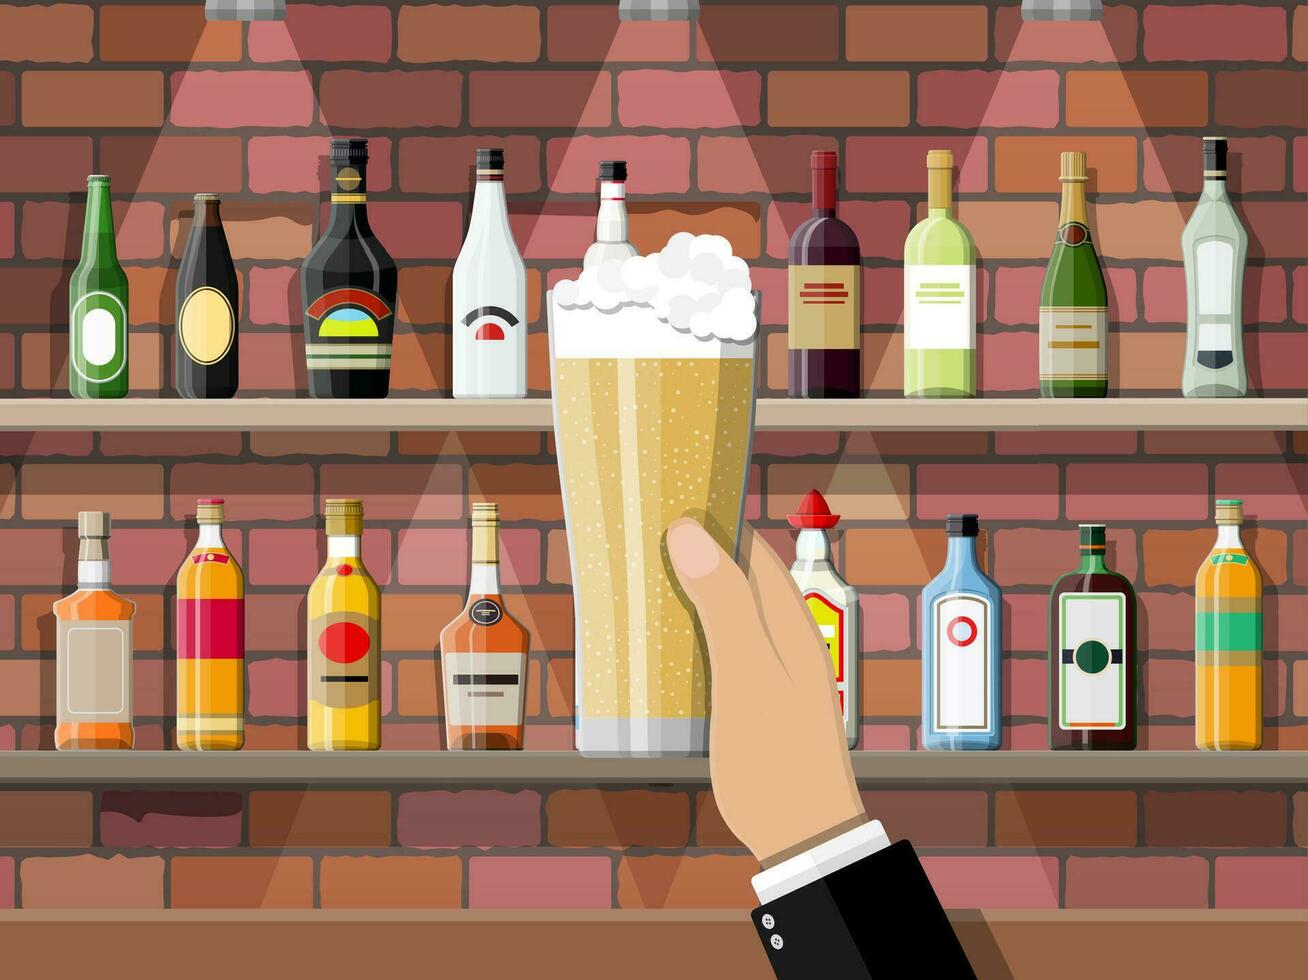 Drinking establishment. Hand with glass of beer. Interior of pub, cafe or bar. Bar counter, shelves with alcohol bottles. Glasses and lamp. Vector illustration in flat style.